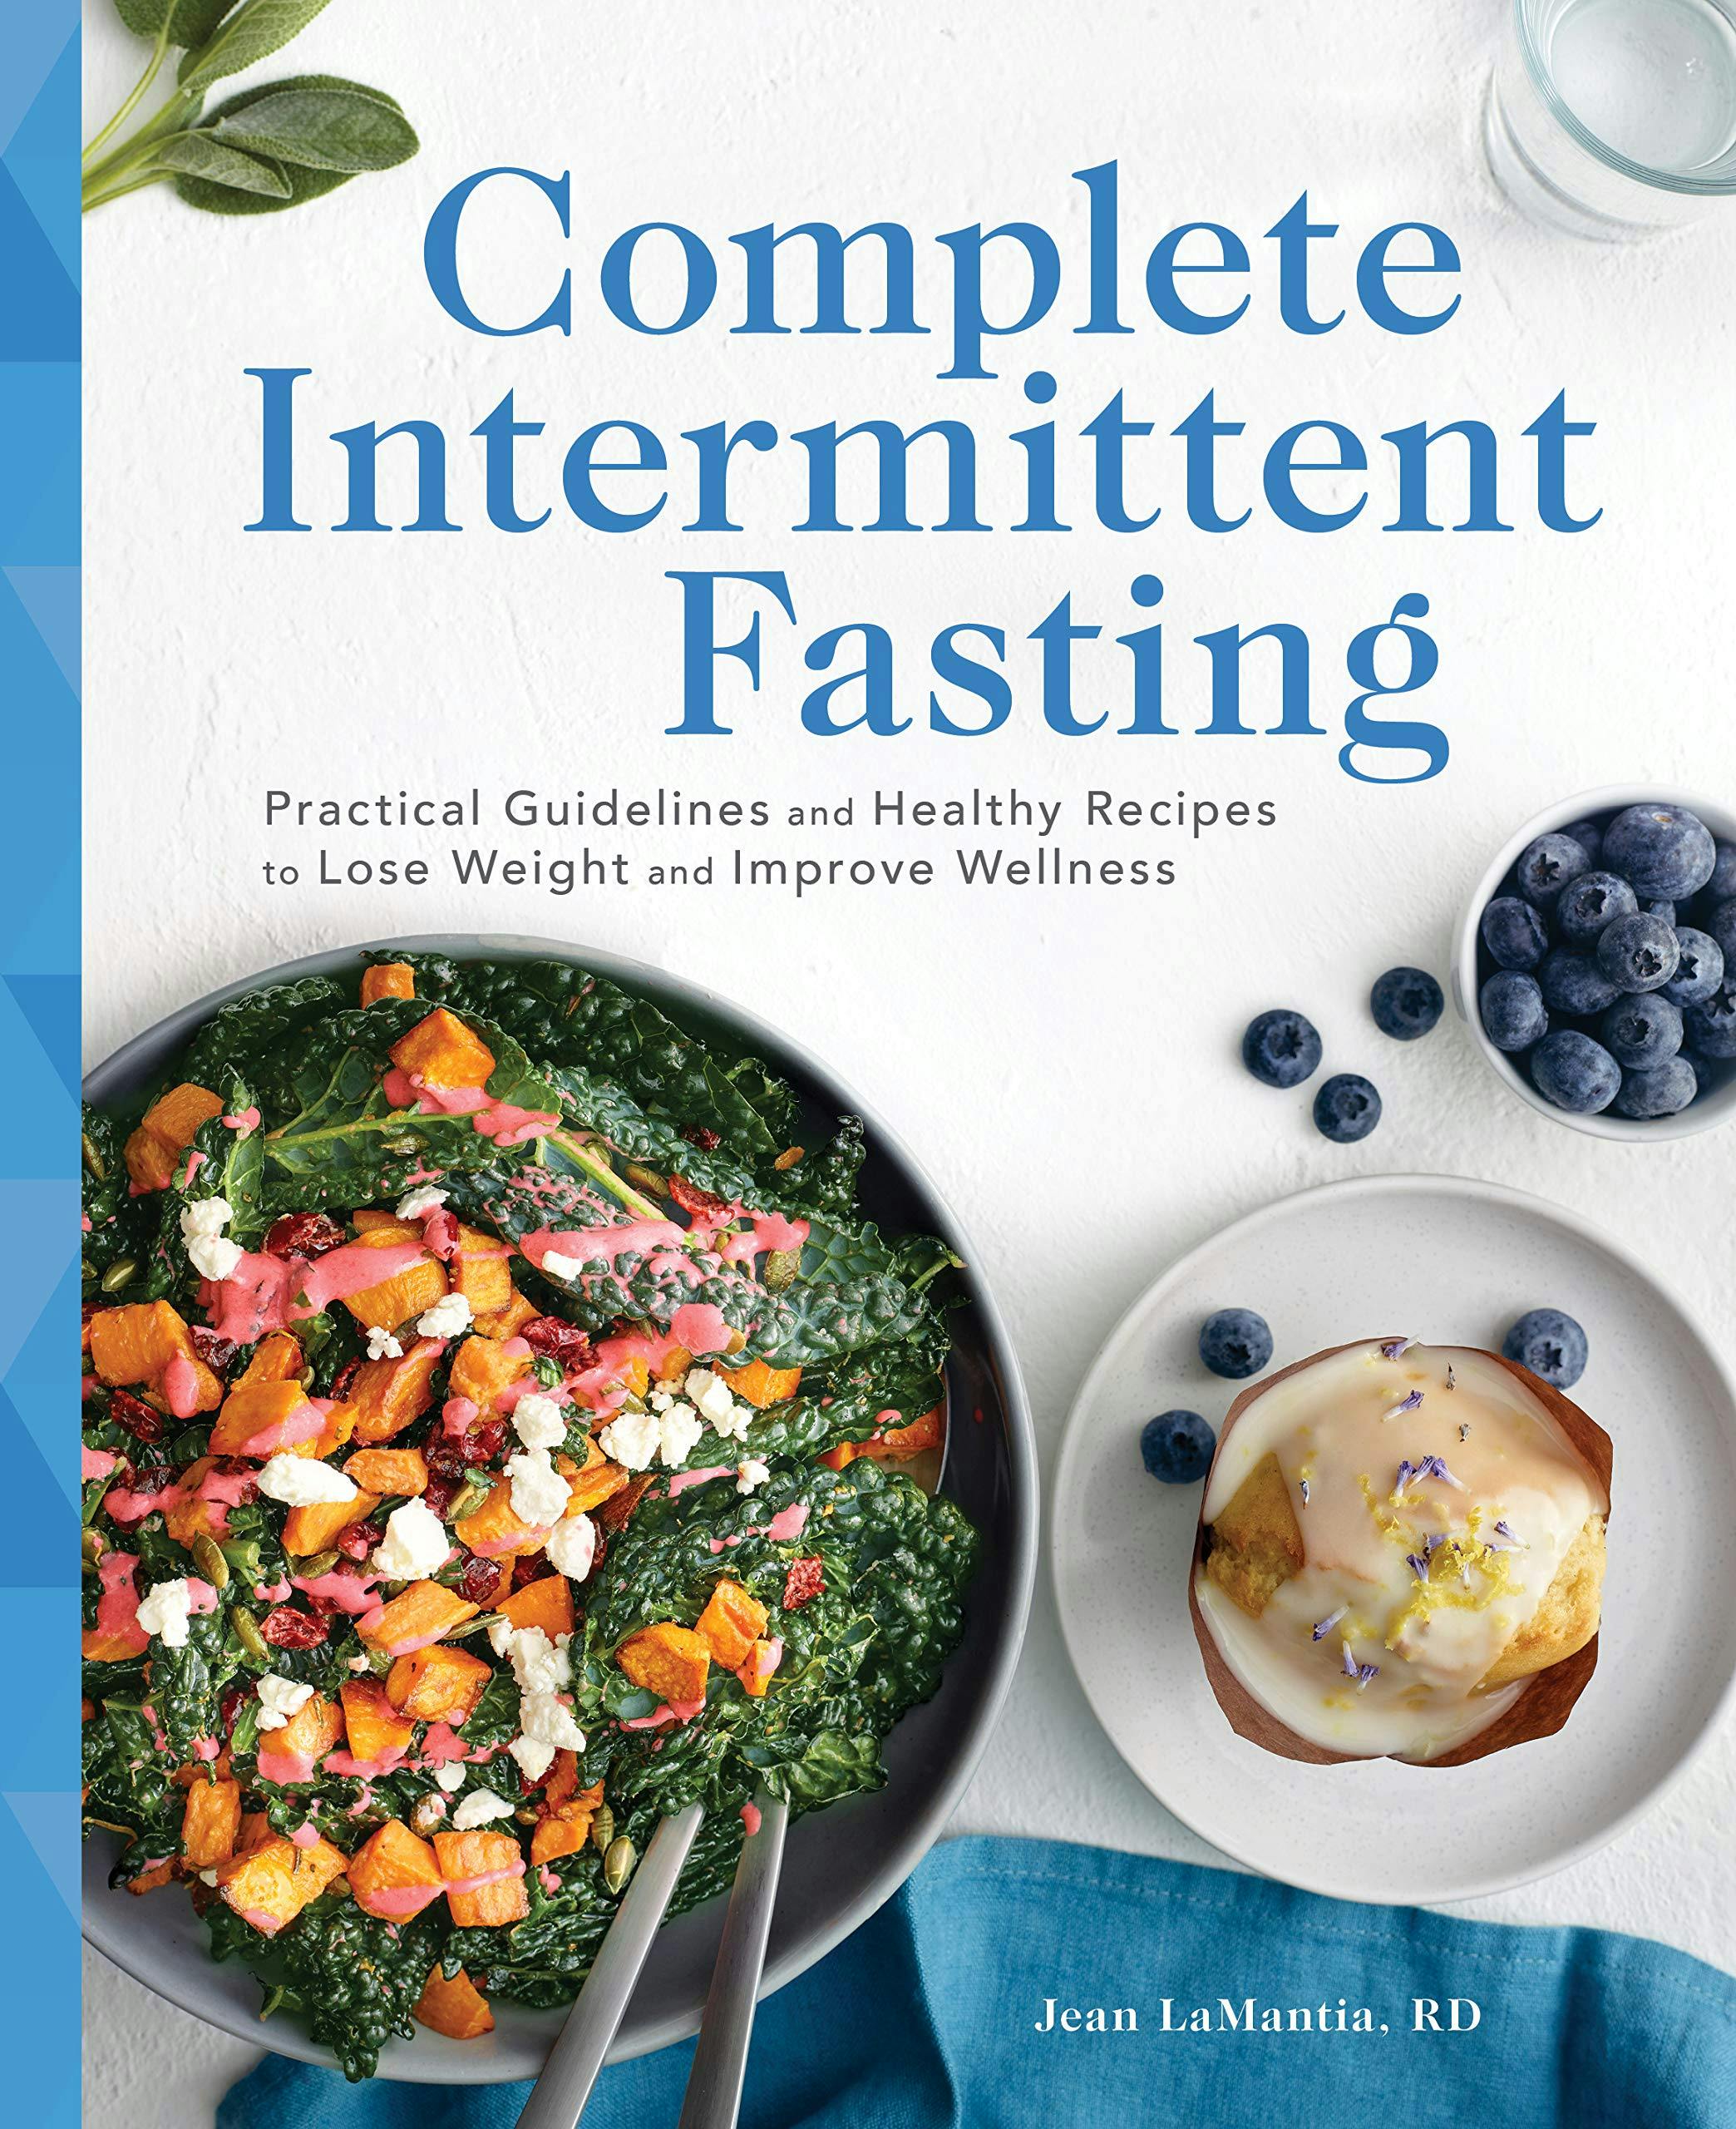  Complete Intermittent Fasting